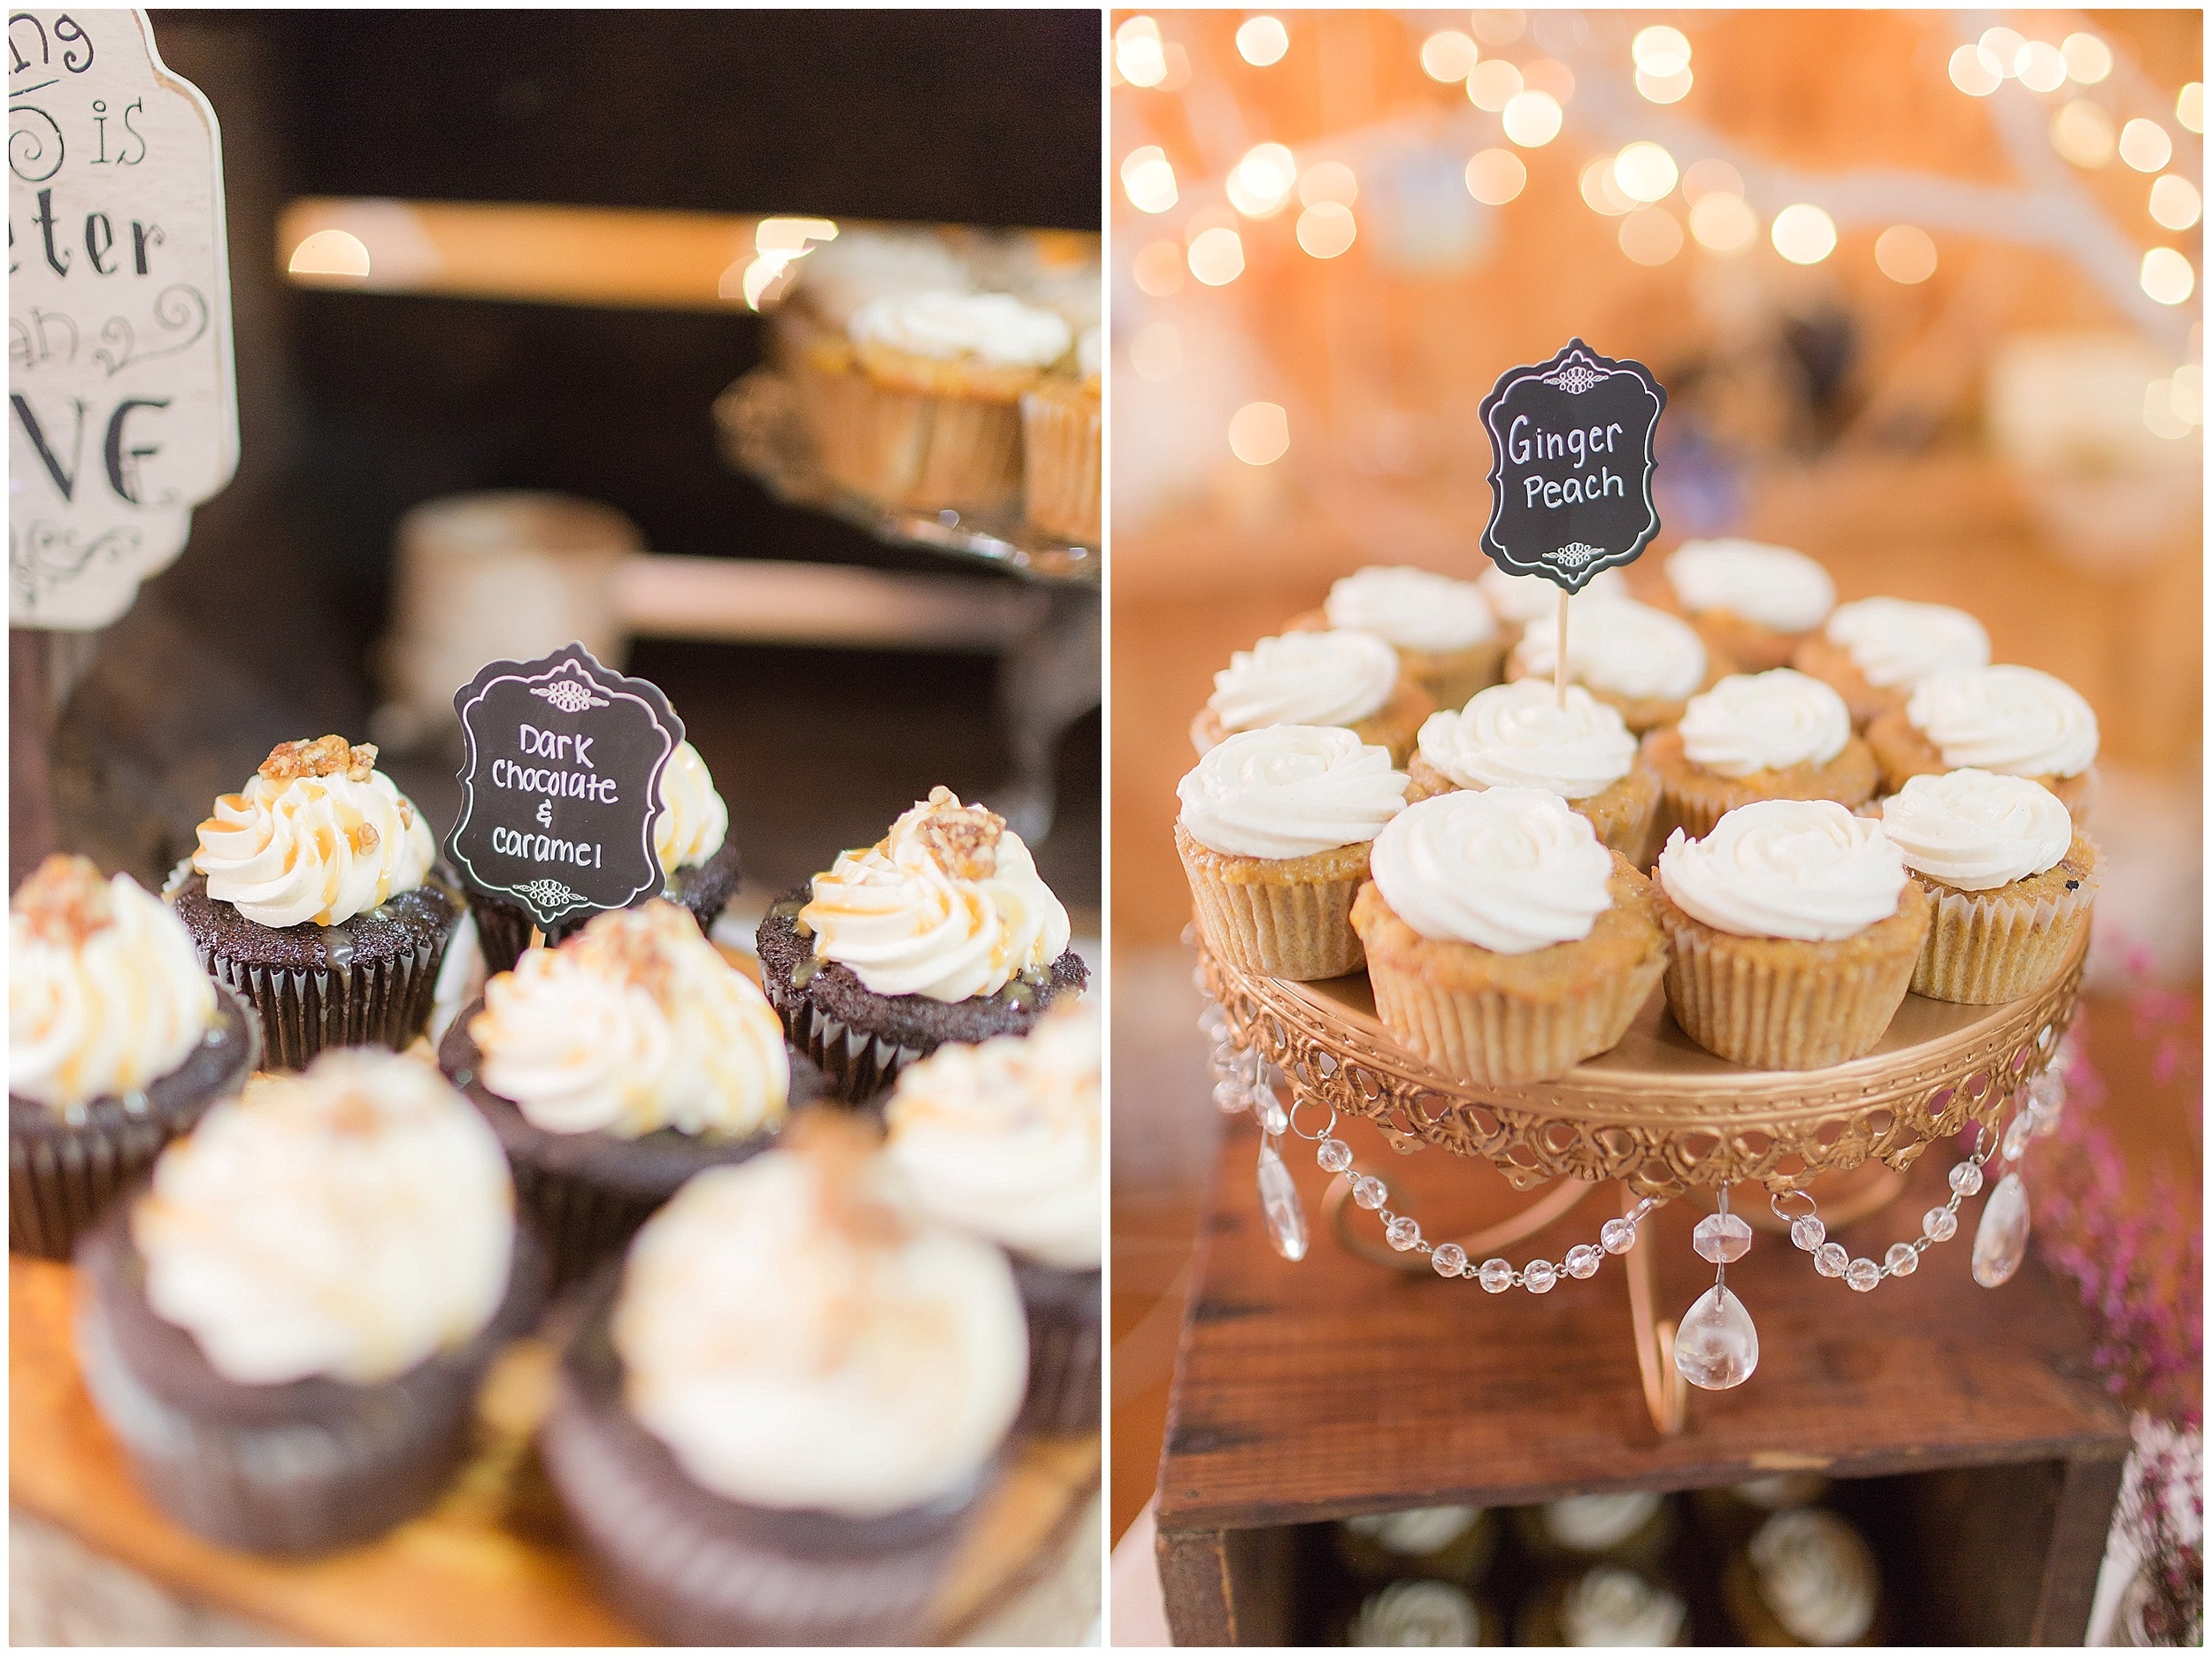 Delicious Cupcakes displayed on a Crystal Embellished Tray.